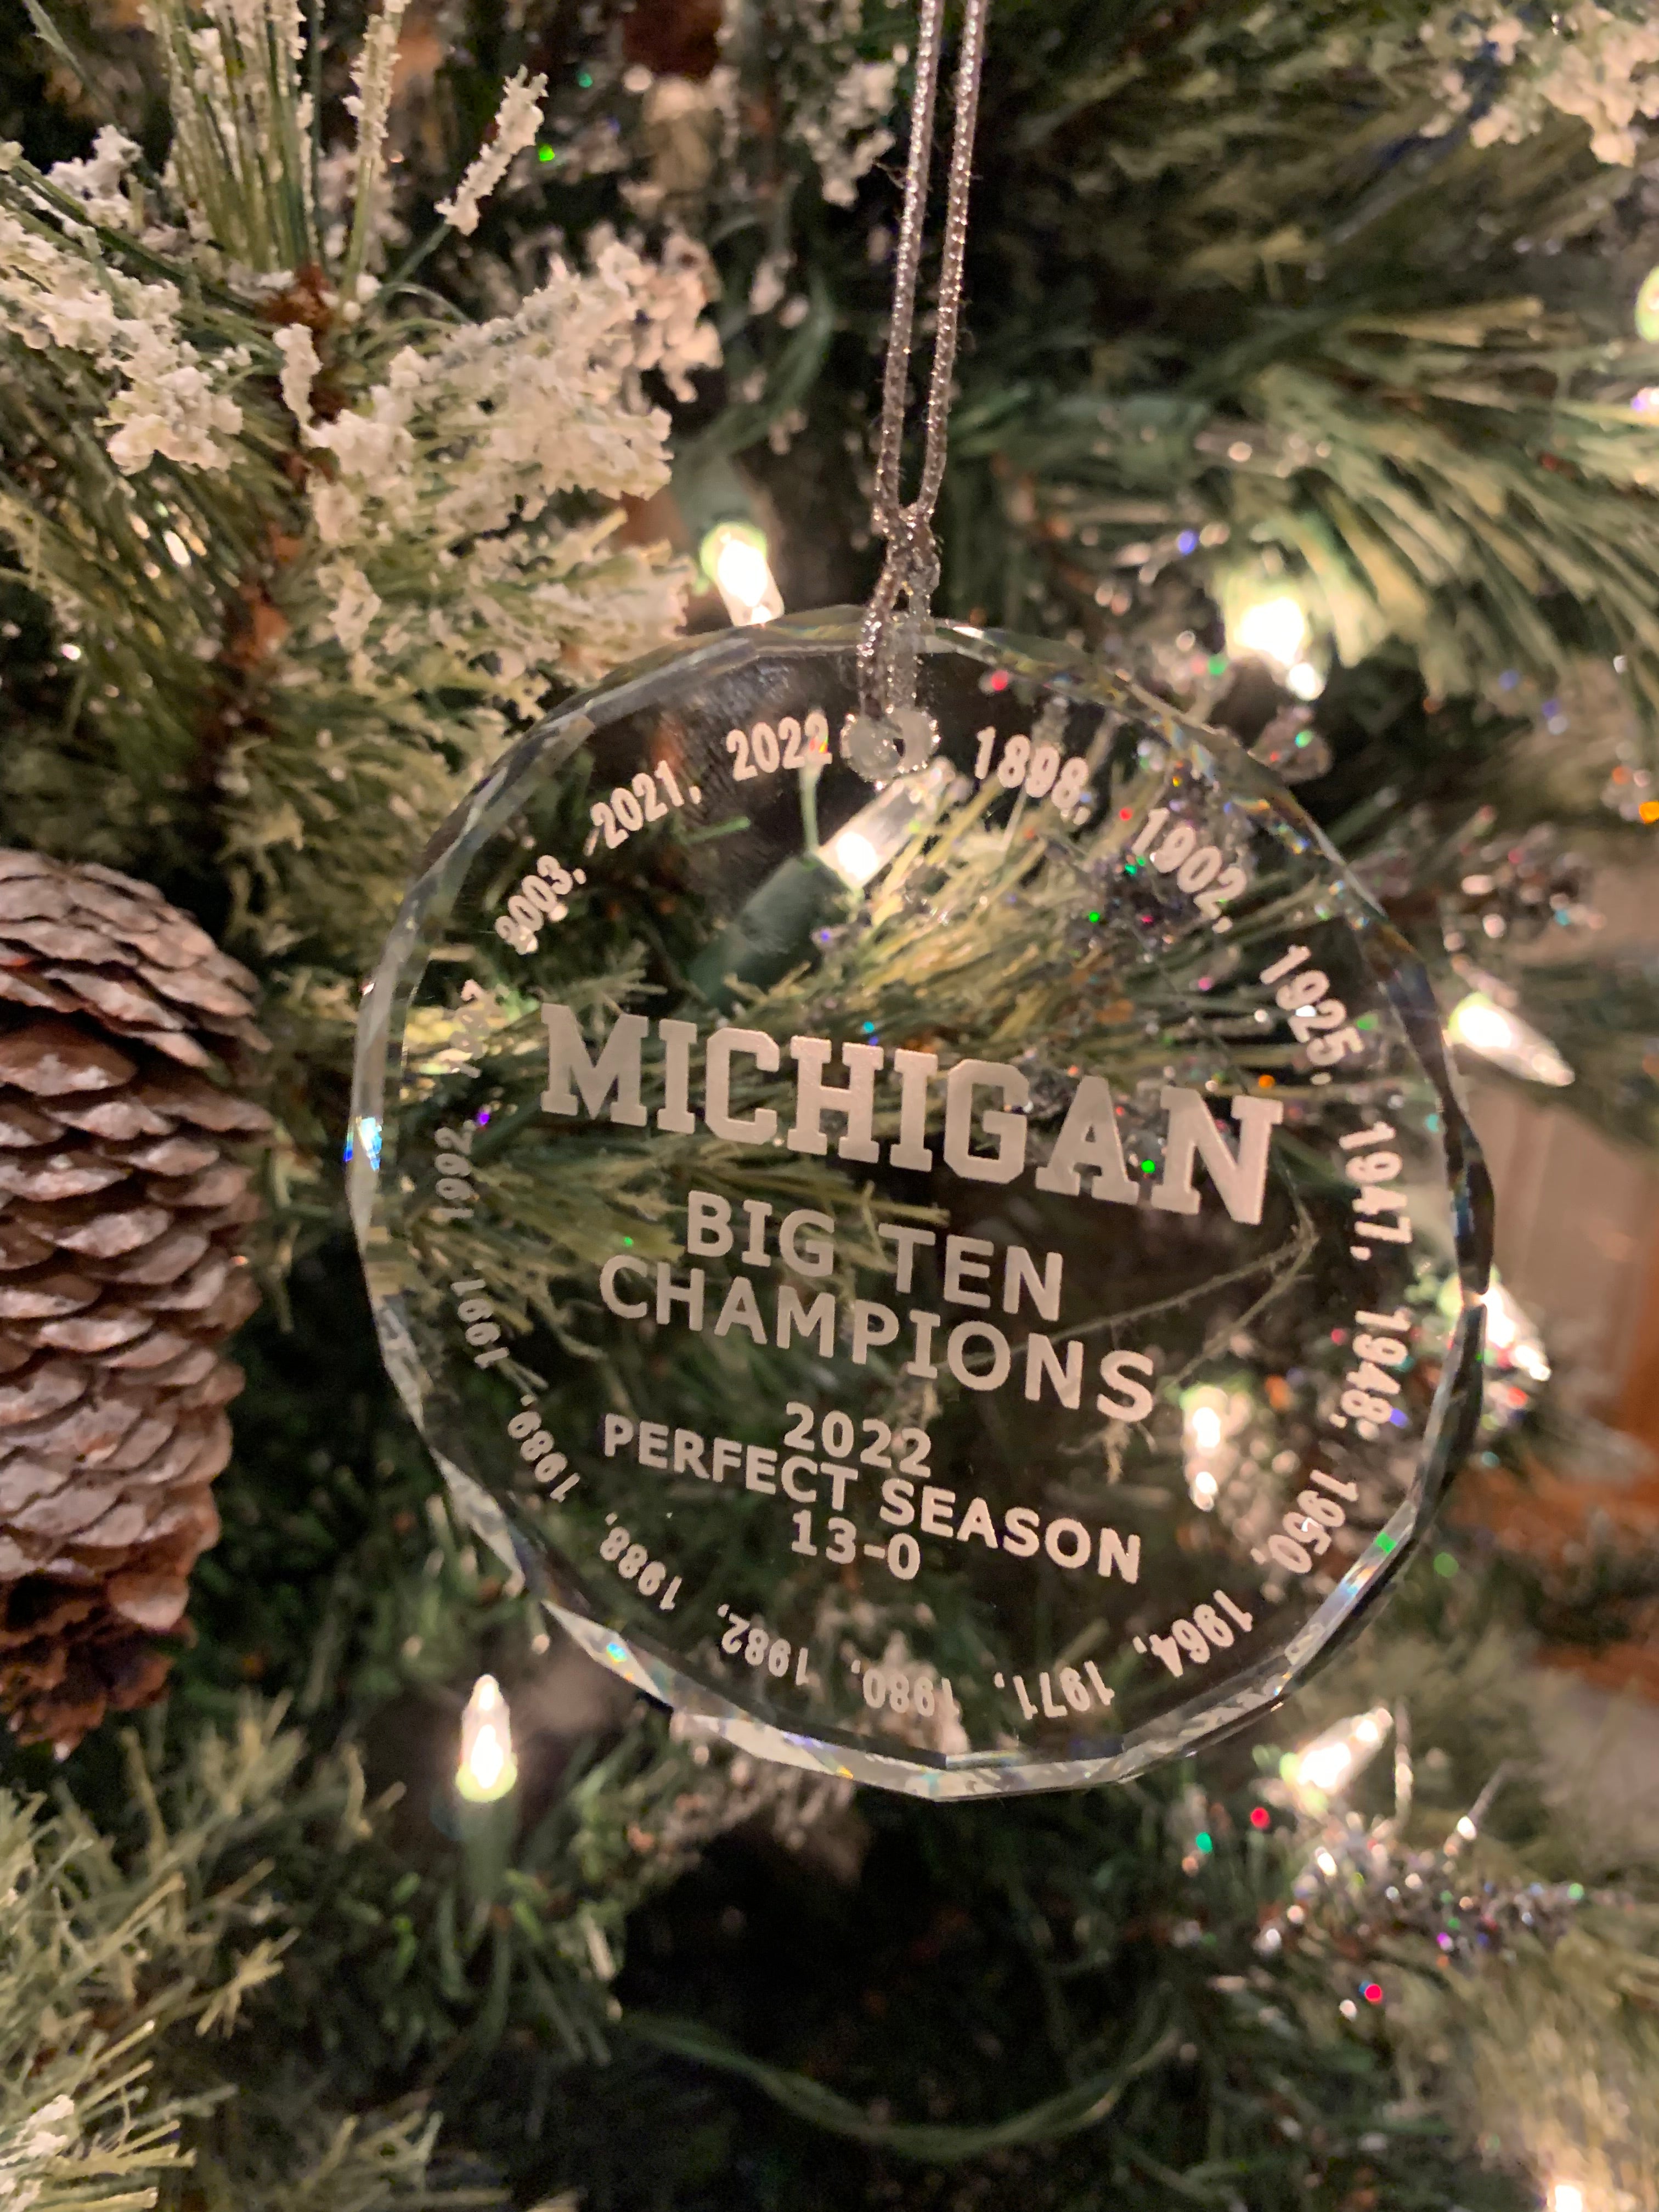 UM University of Michigan BIG 10 champions all years 2022 Crystal Ornament Wolverines